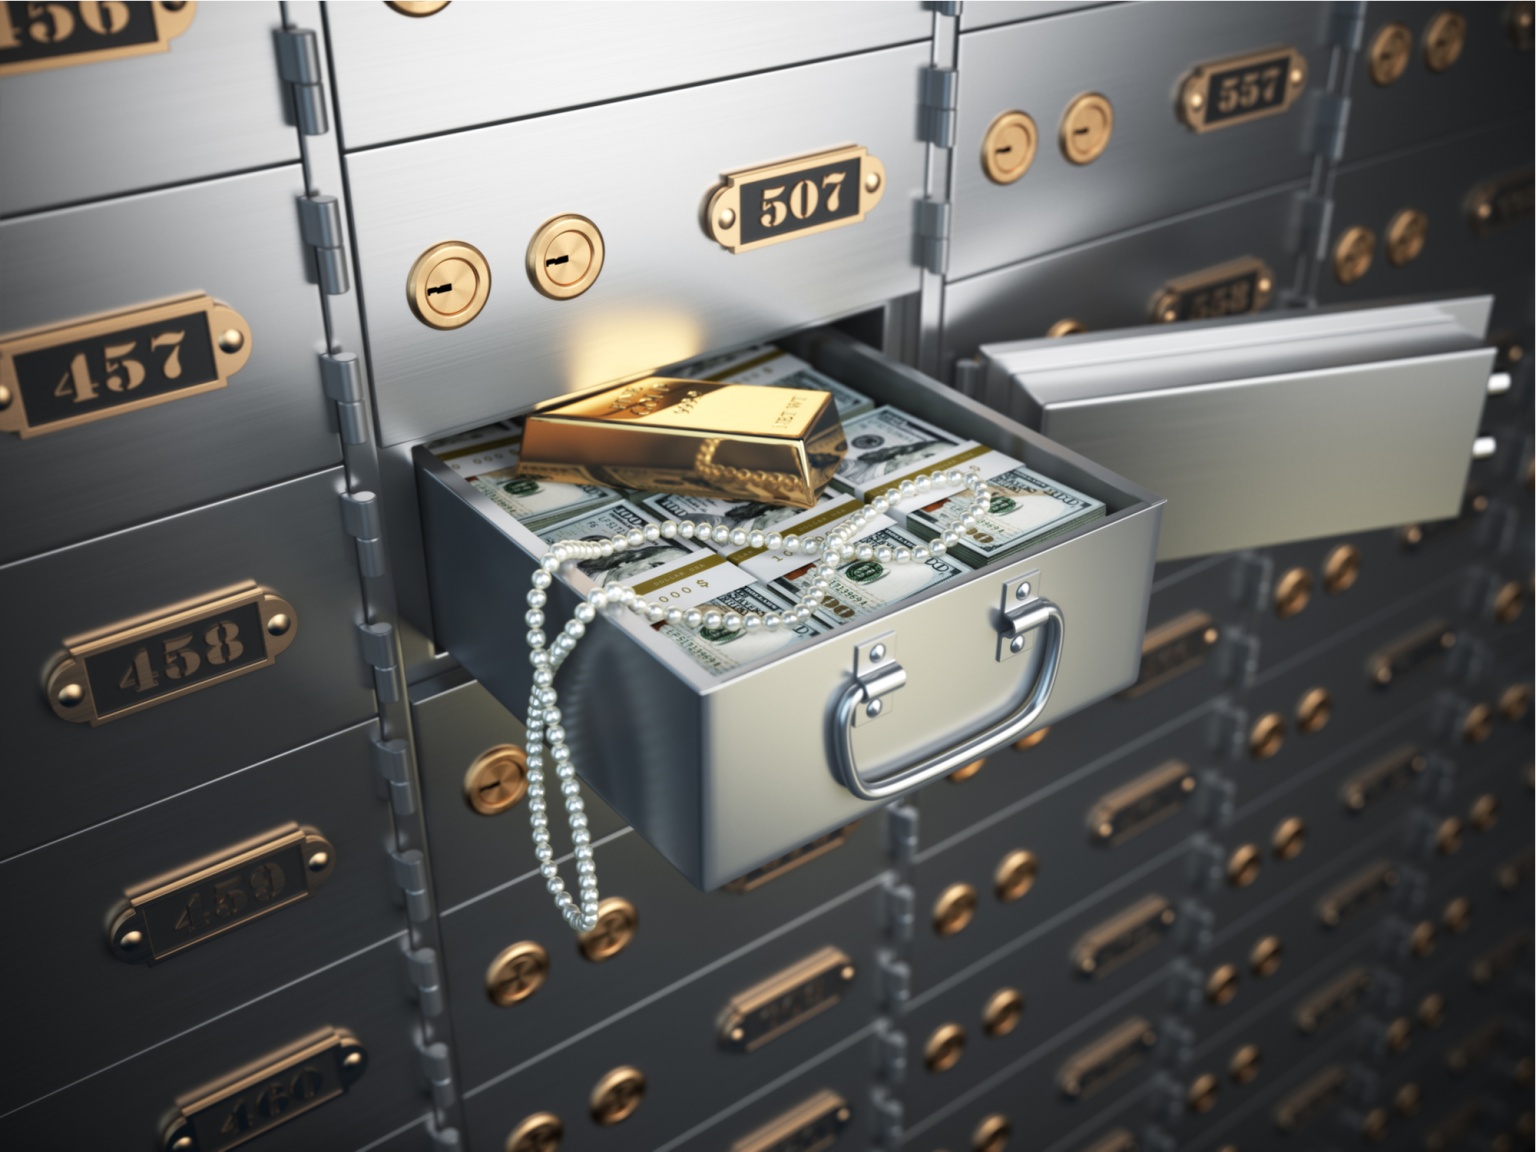  A poorly defined shared asset during divorce can lead to financial complications and legal battles, illustrated by the image of a safety deposit box containing gold bars and cash.